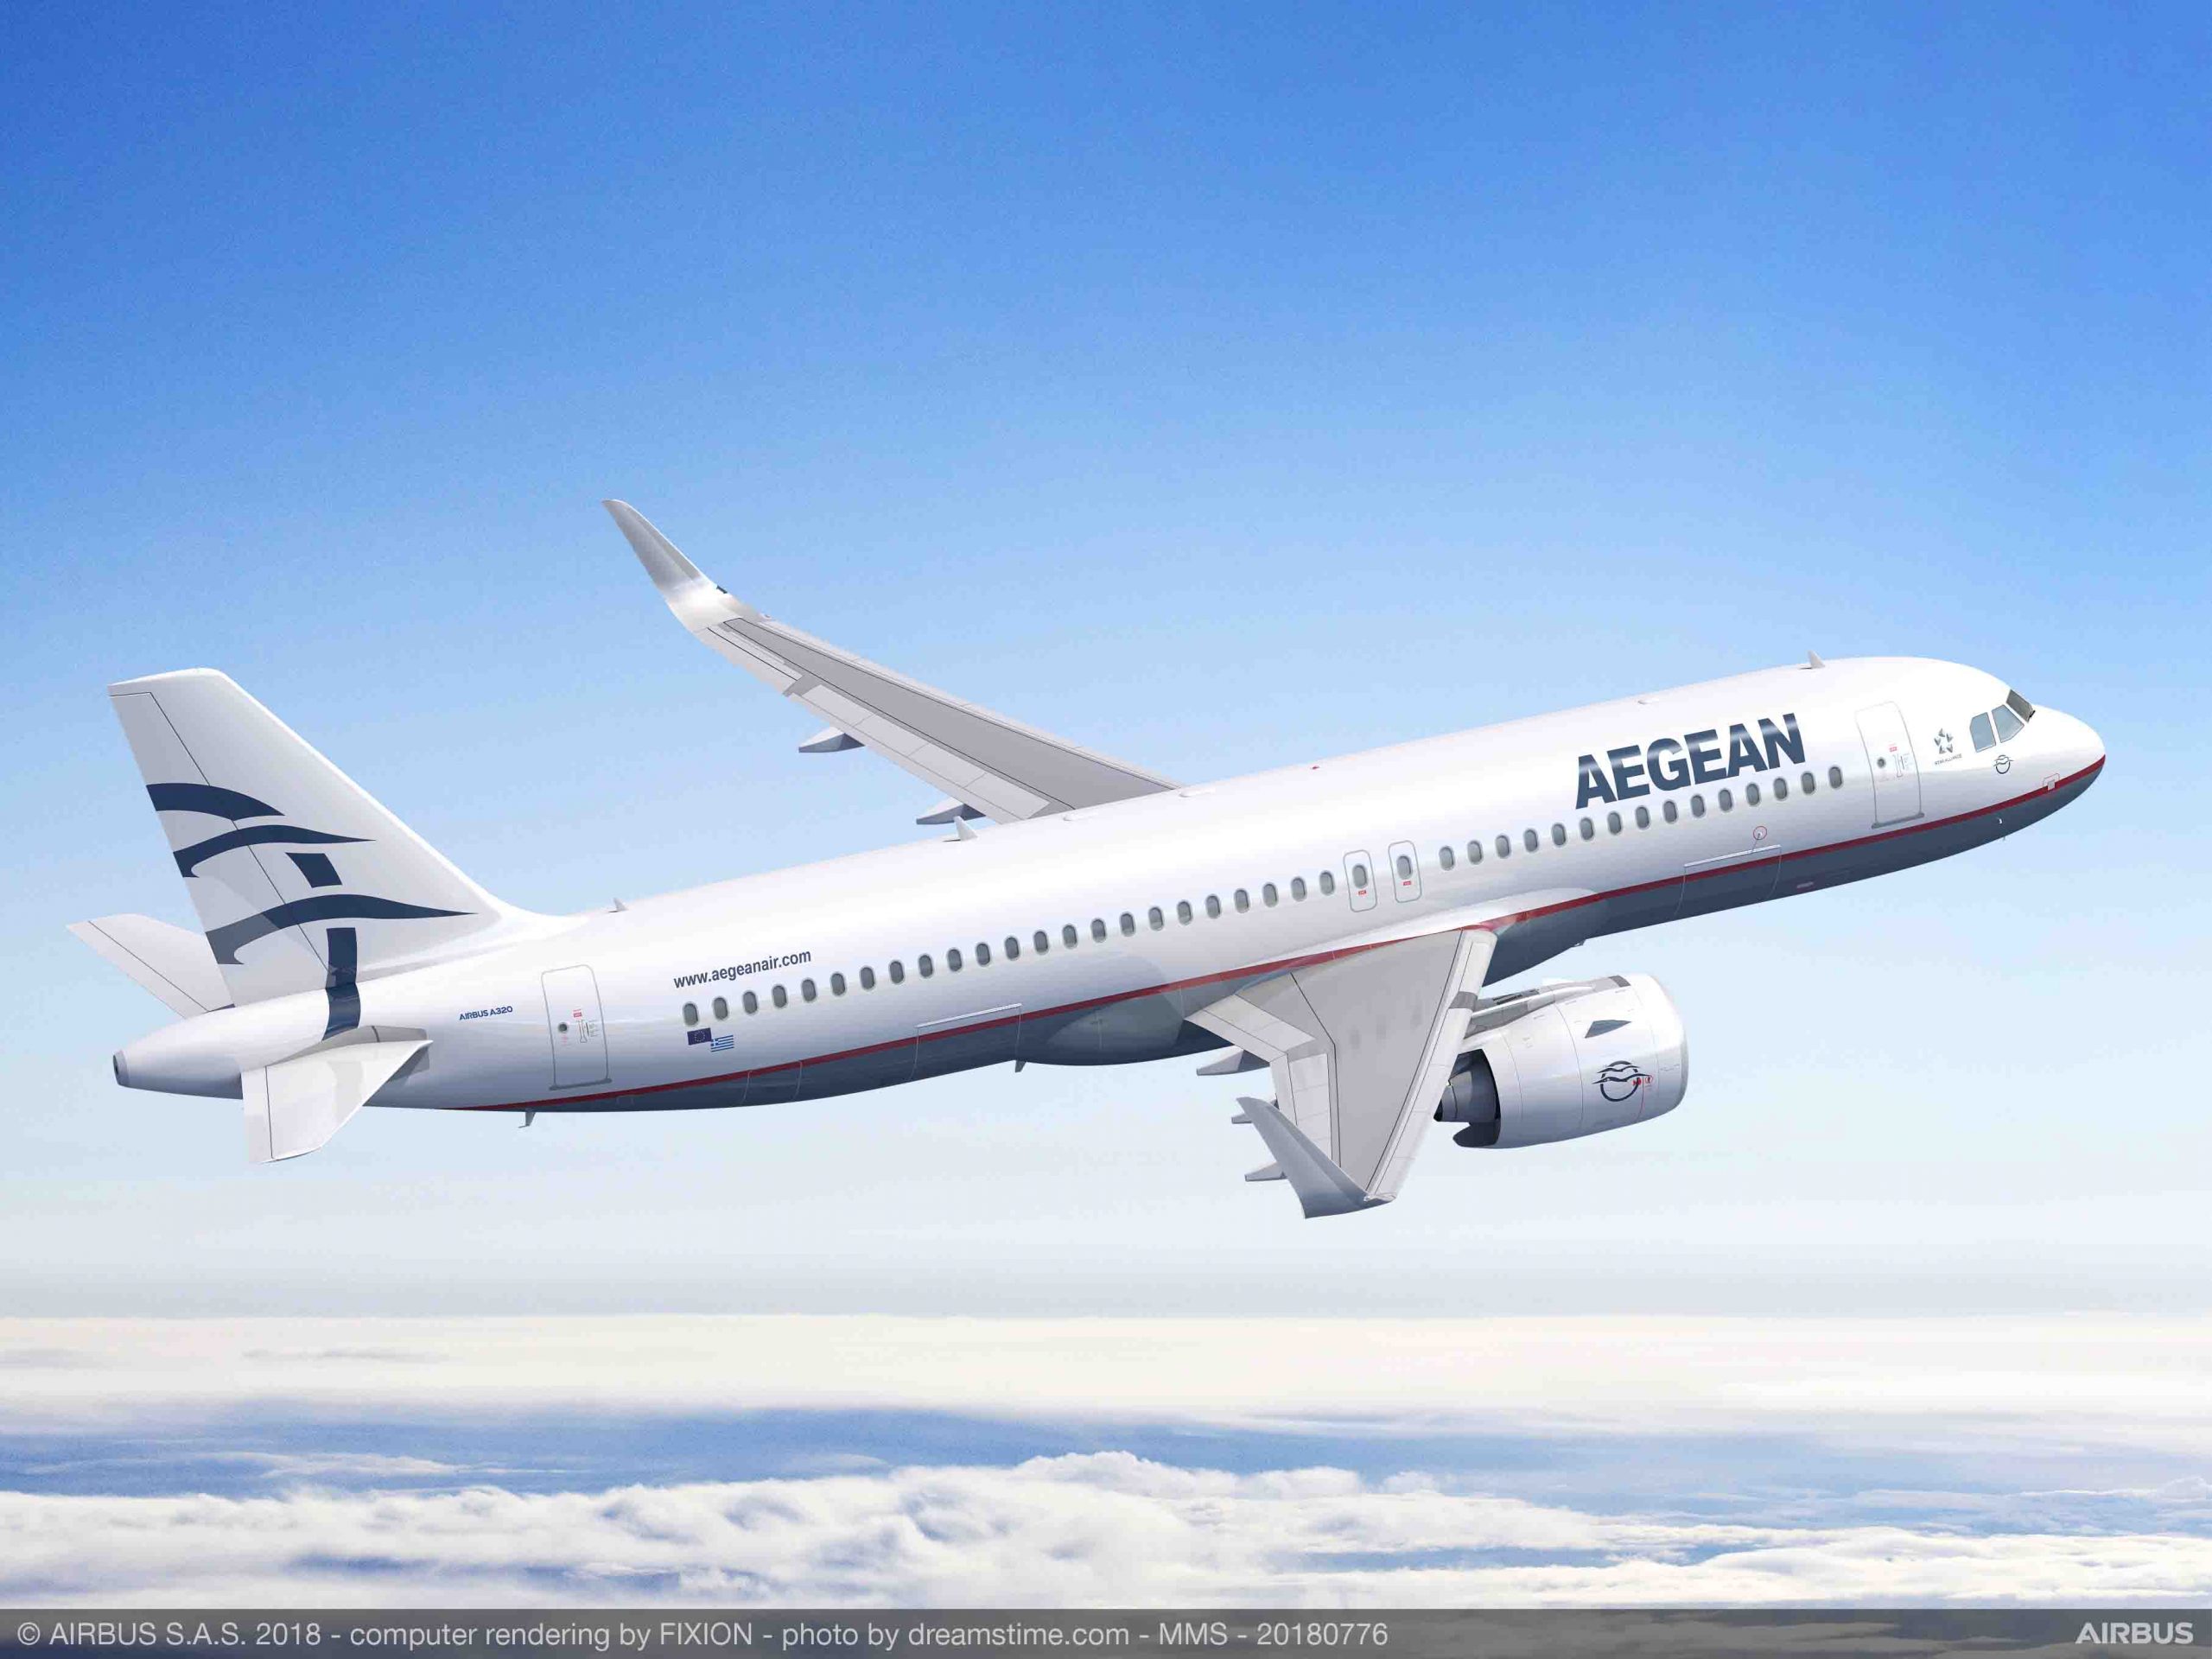 Aegean Airlines firms up order for 30 A320neos